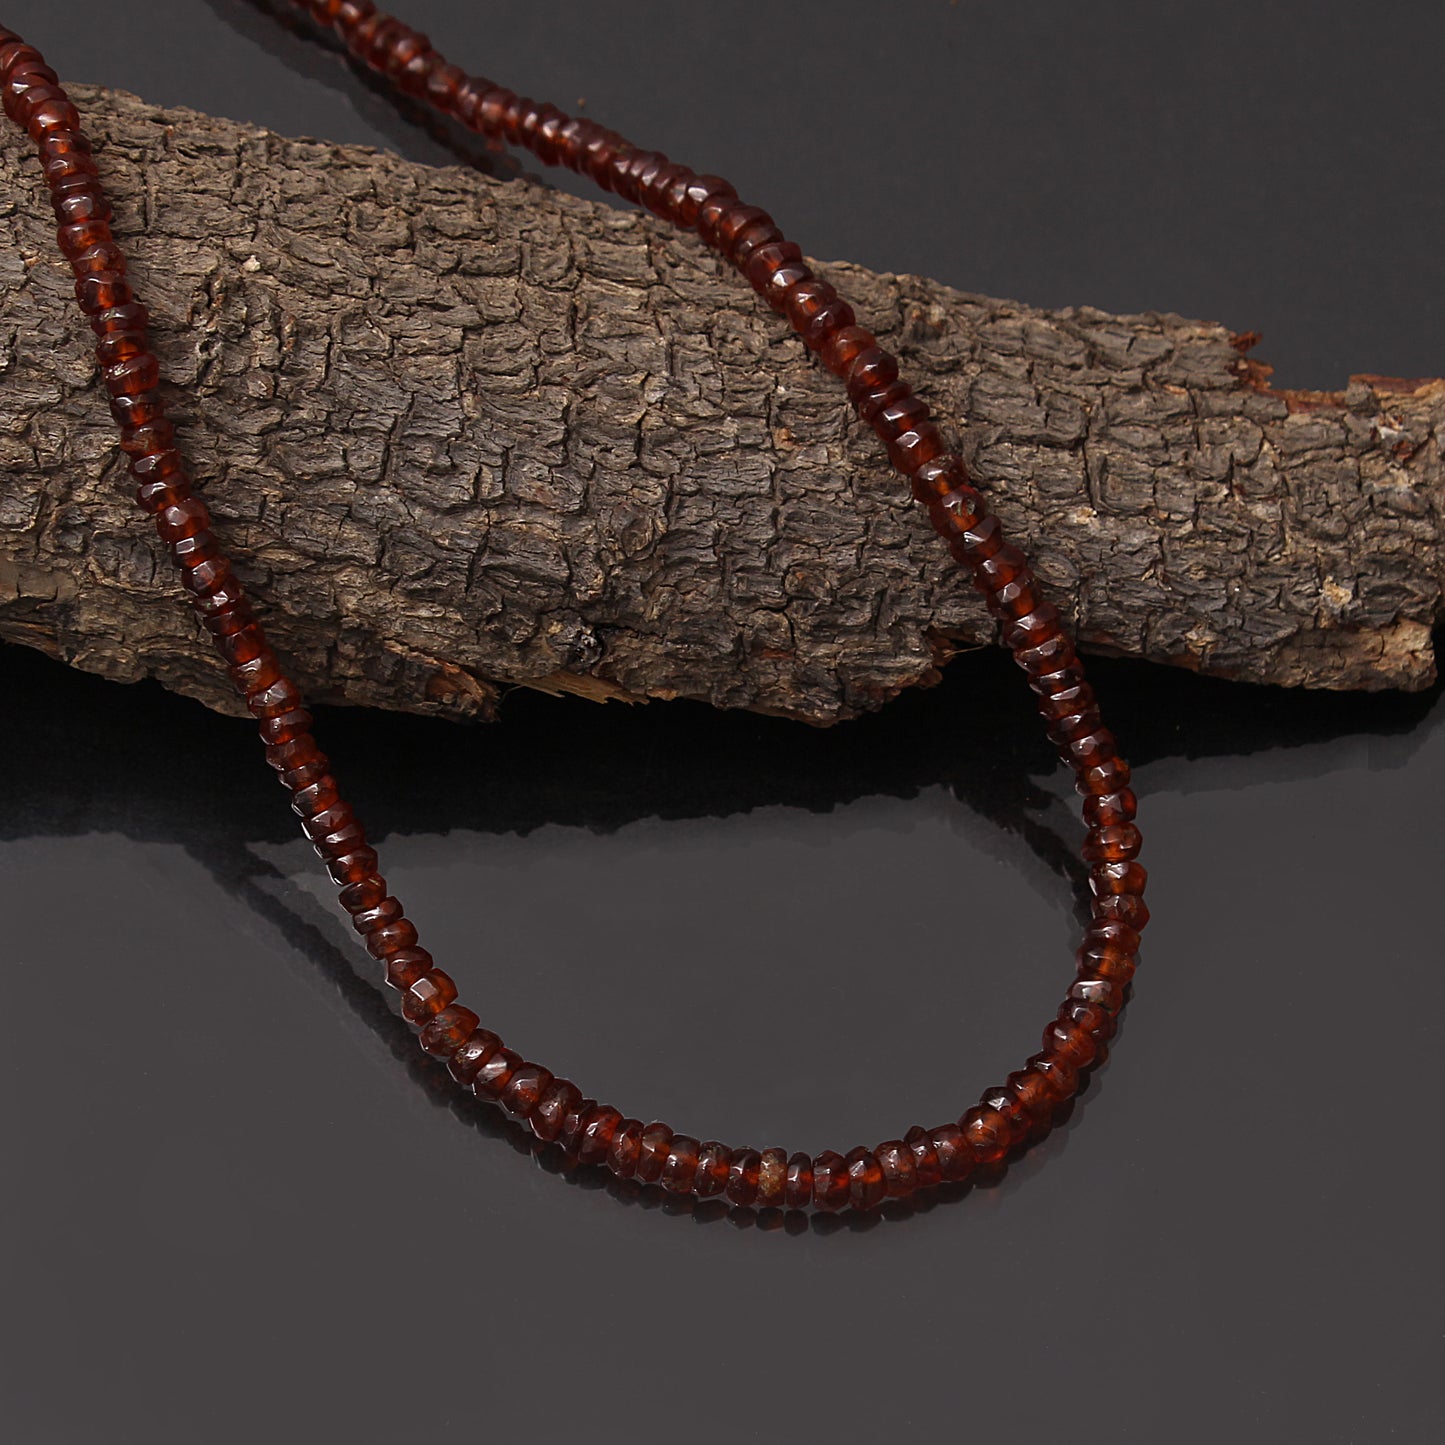 Natural Hessonite Garnet Necklace with Silver Clasp